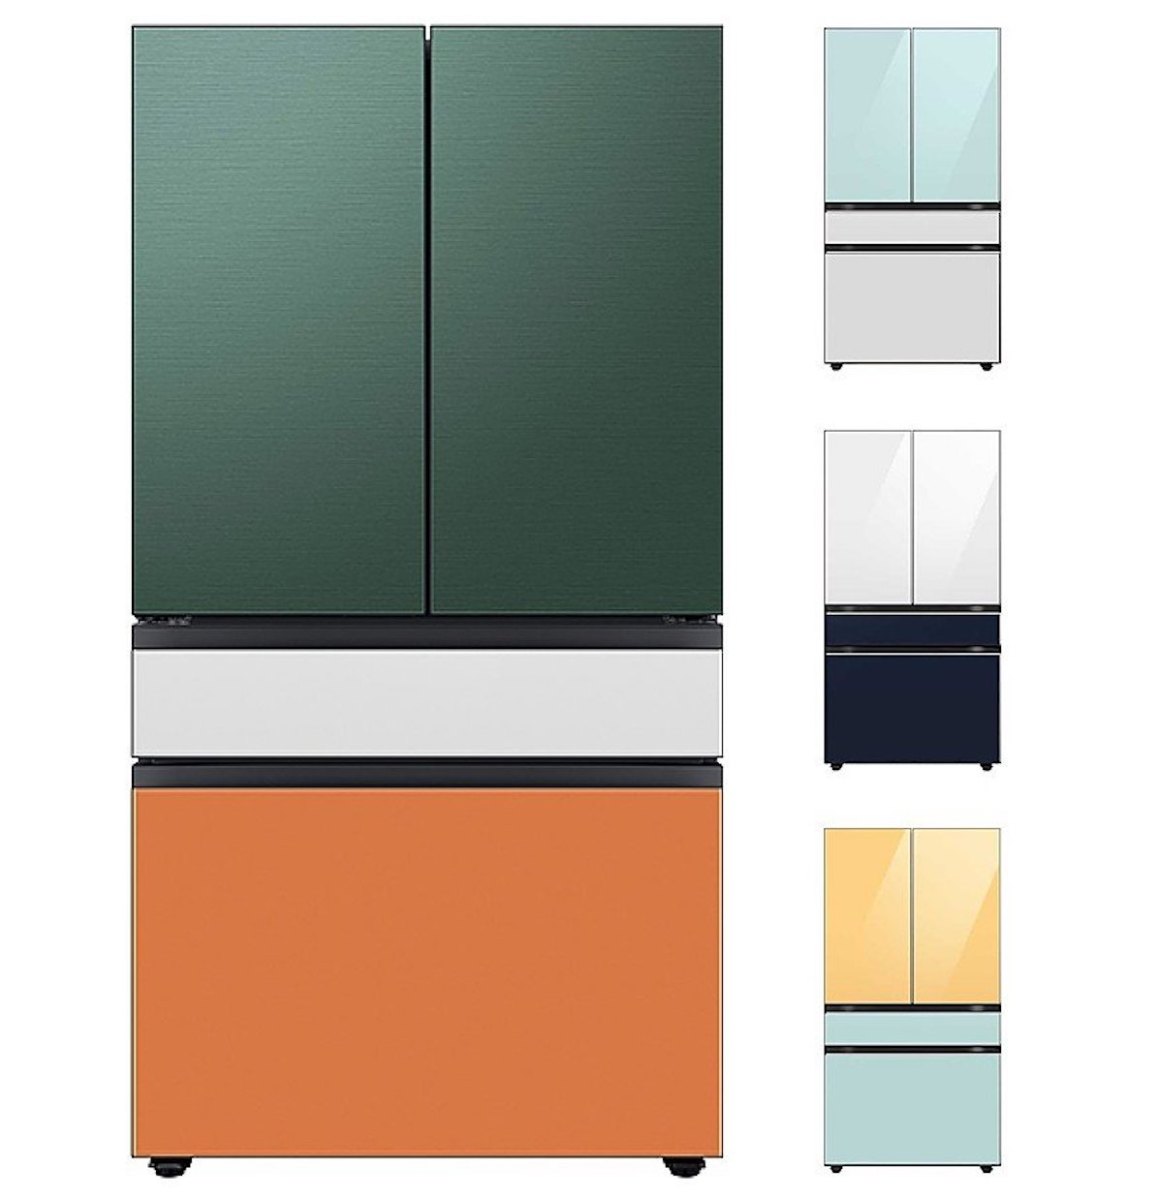 A multi-colored Samsung refrigerator sits next to color options.